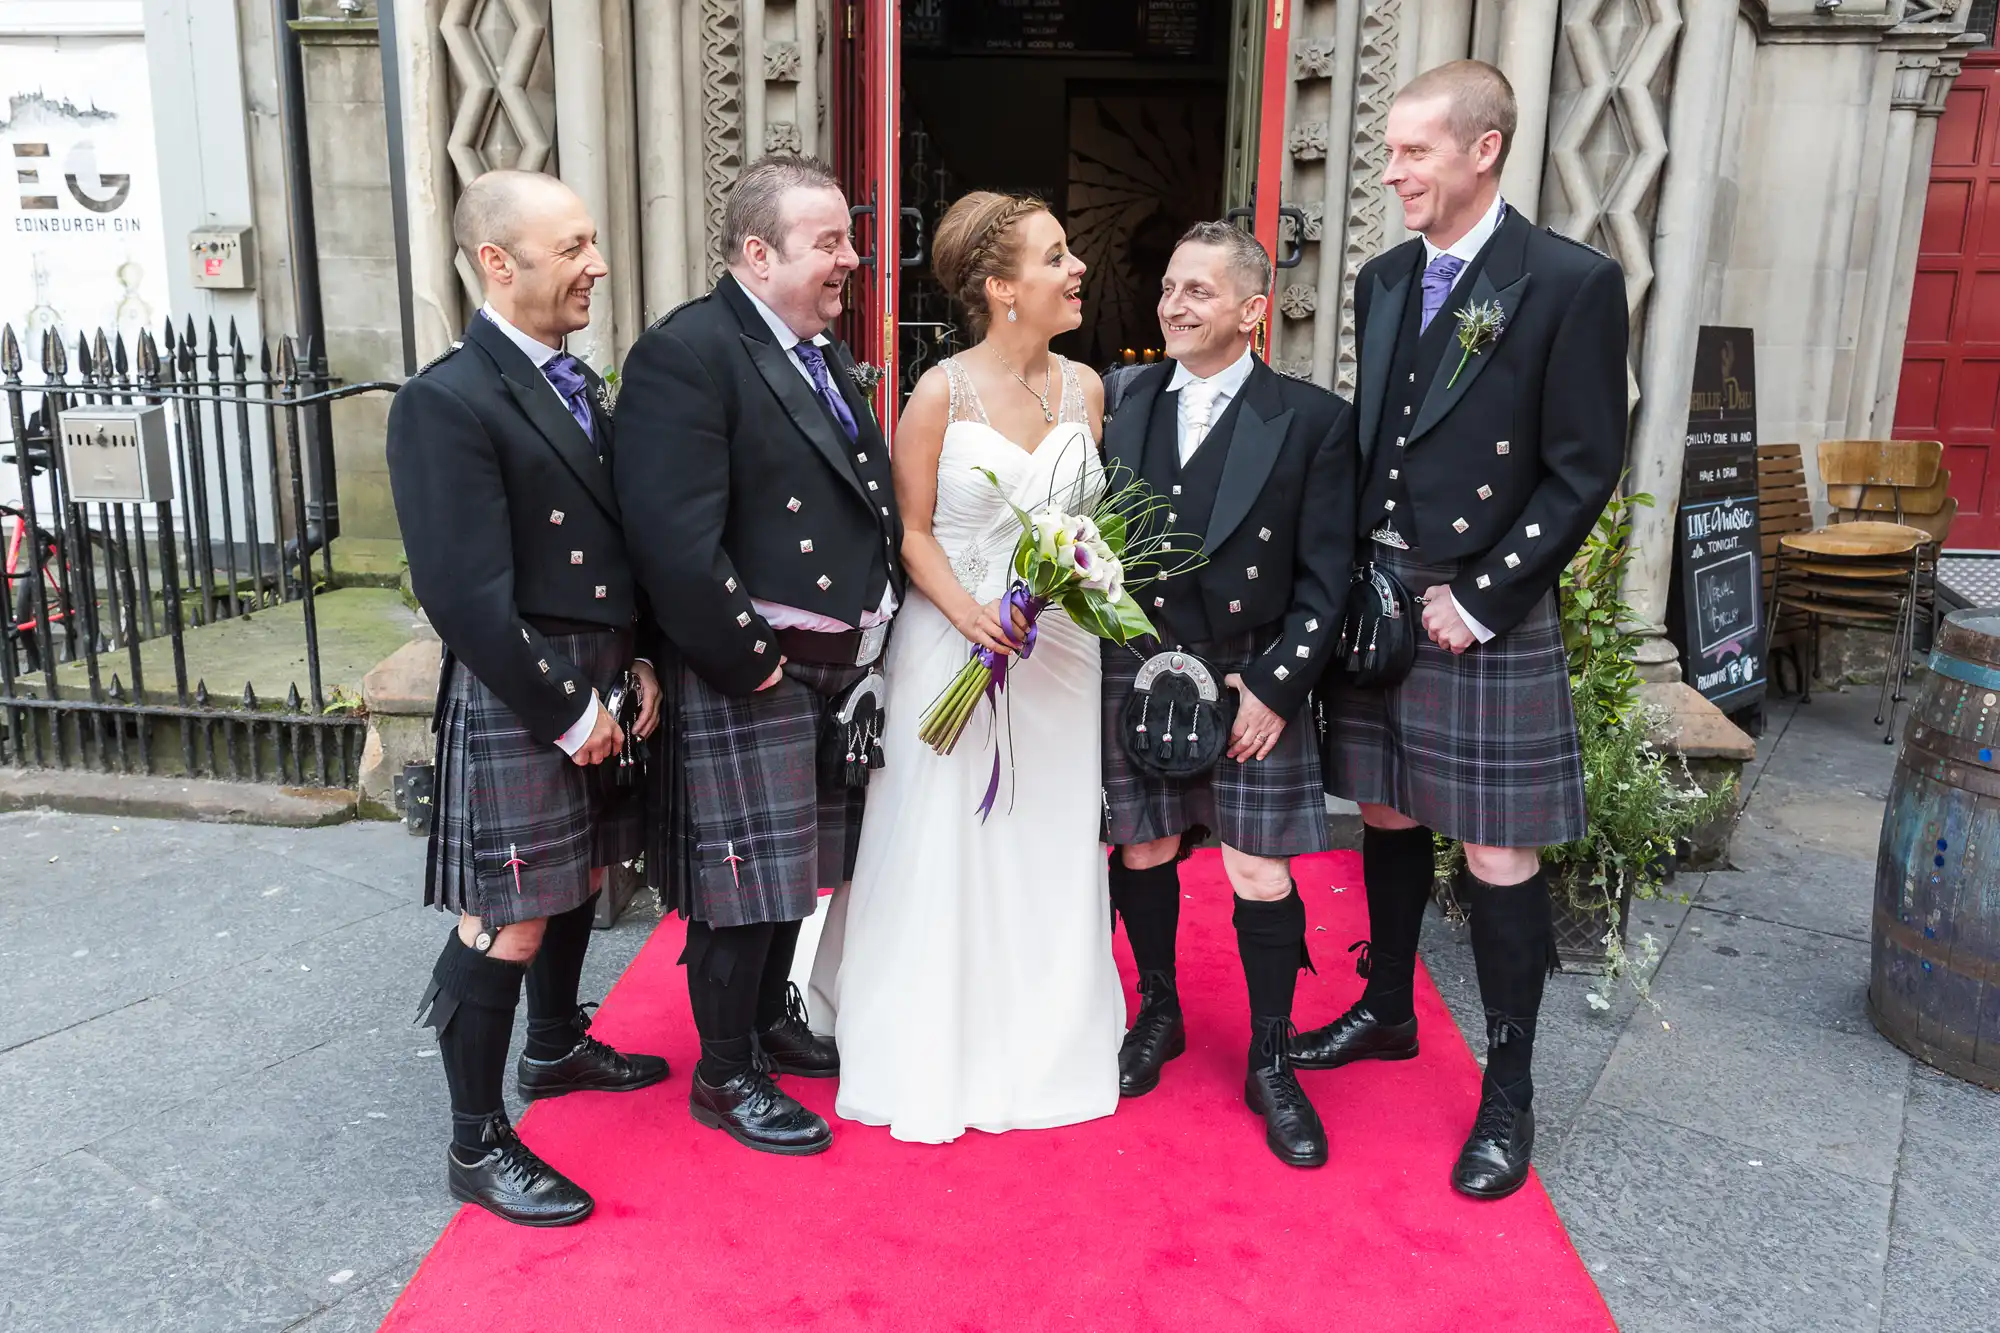 A bride and groom laugh with three groomsmen in kilts outside a building with a red carpet entrance.